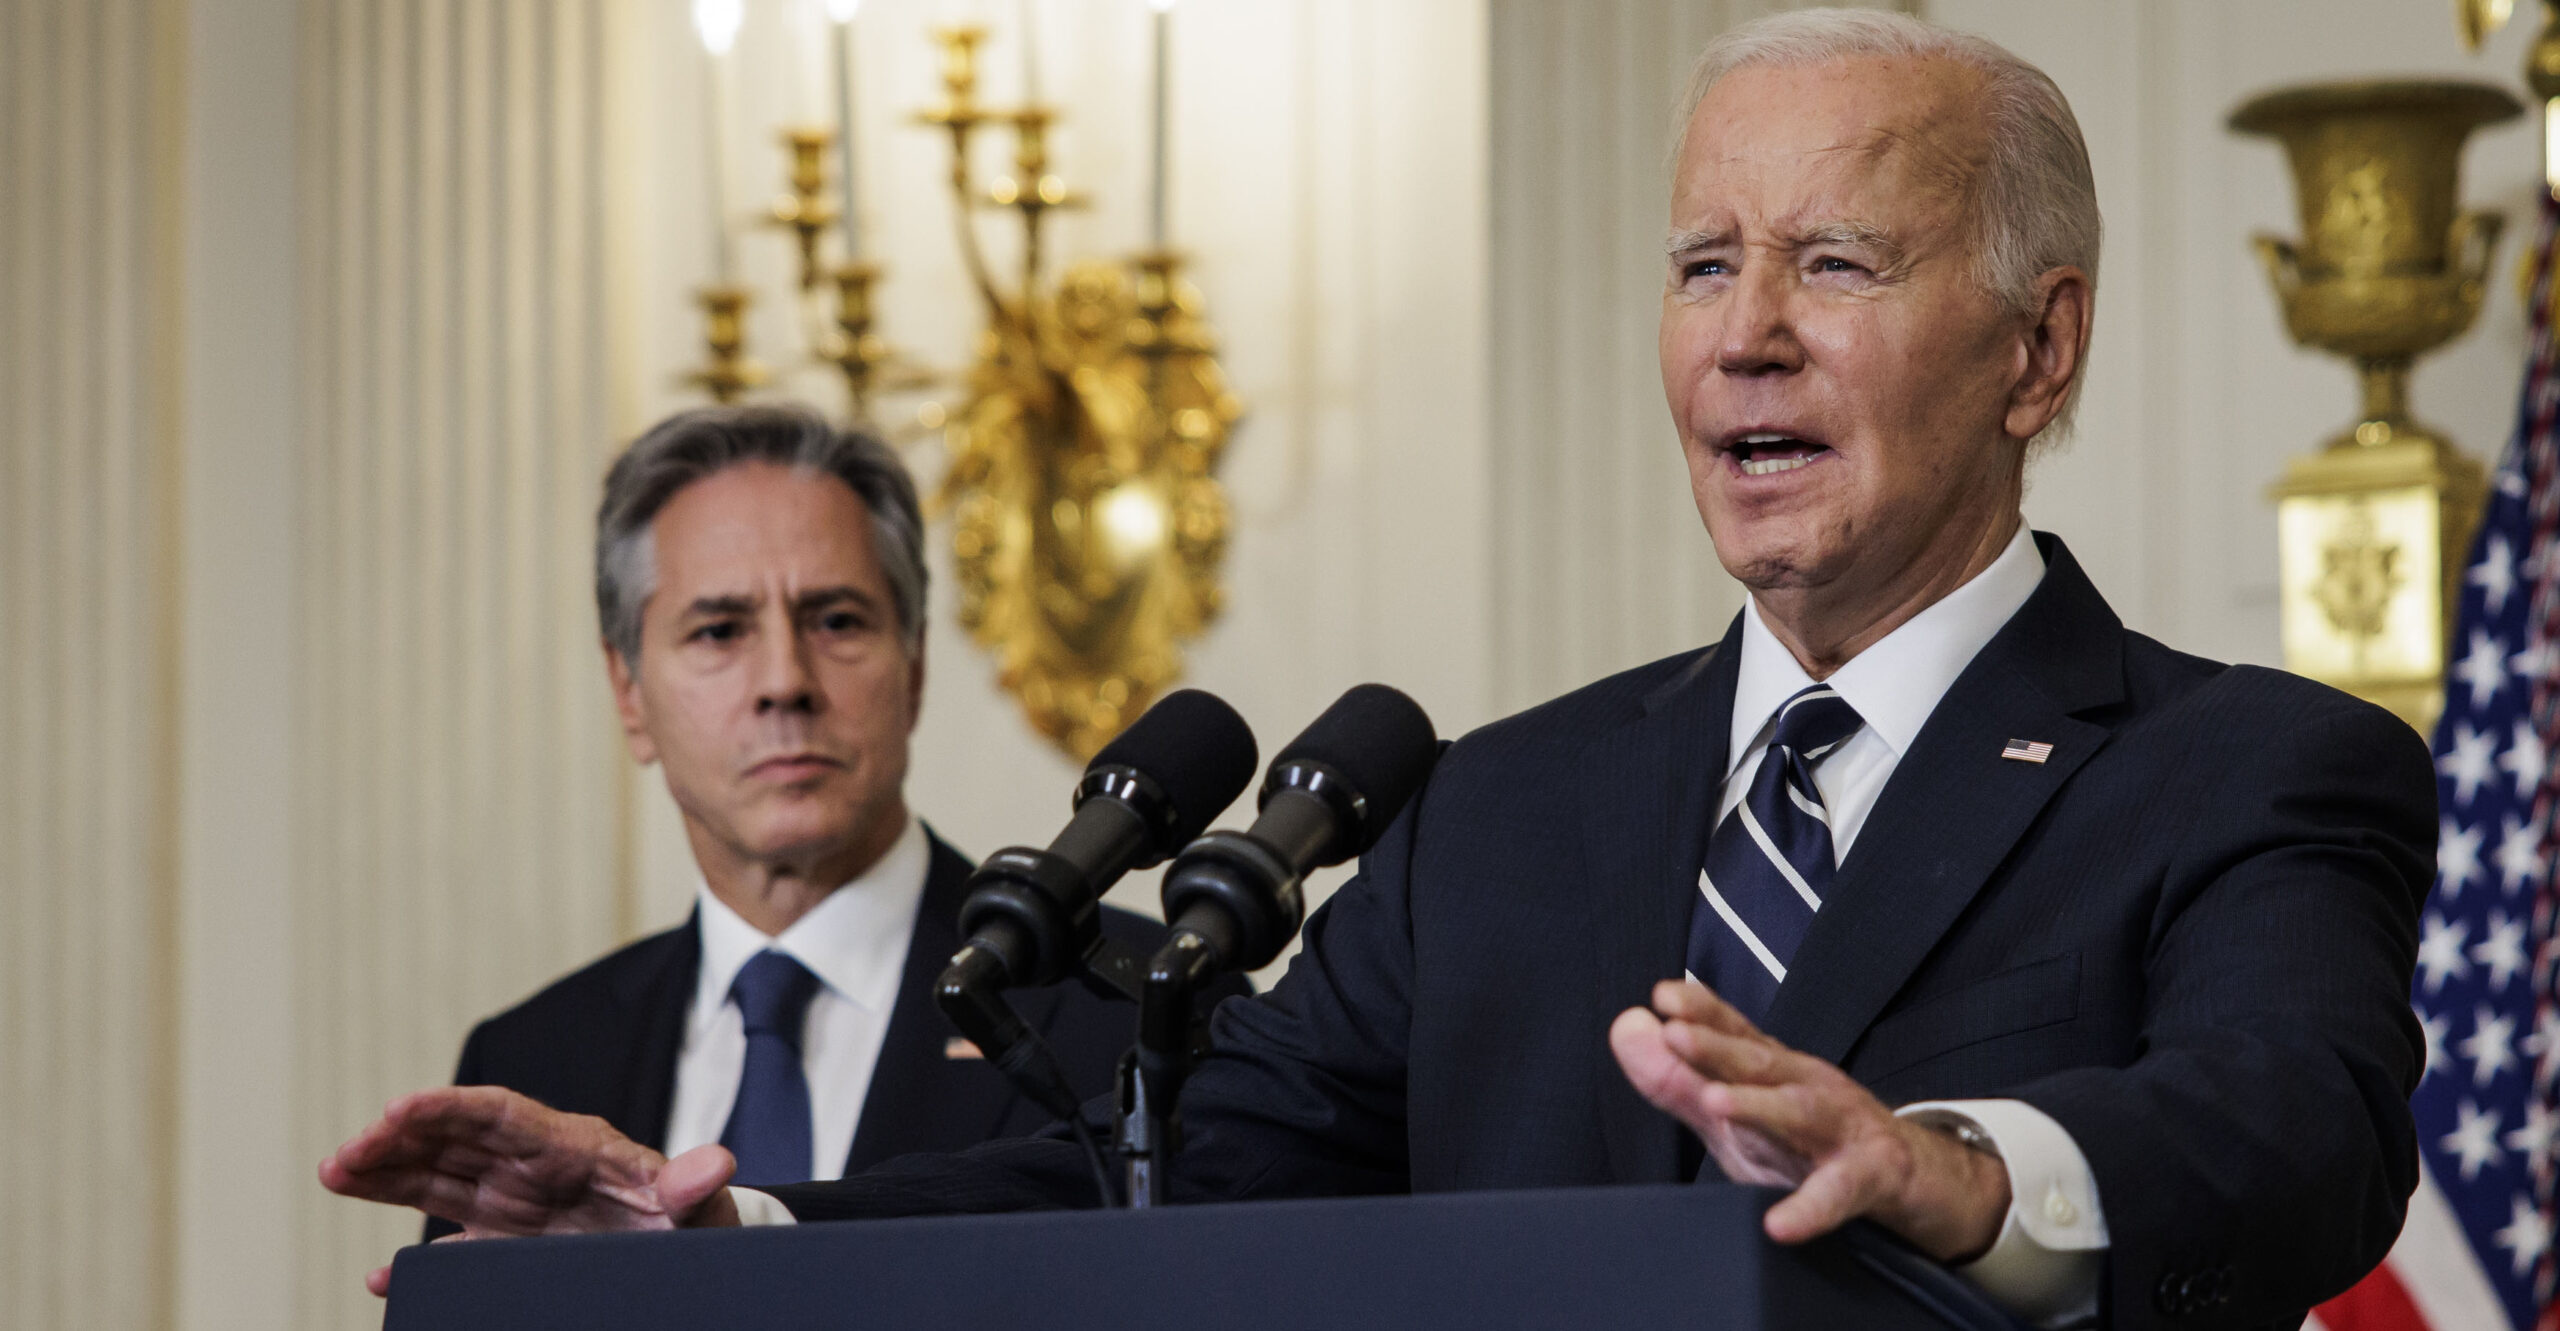 EXCLUSIVE: Christian, Pro-Life Groups Push to Reauthorize Biden's 'Reimagined' AIDS Program Promoting Abortion